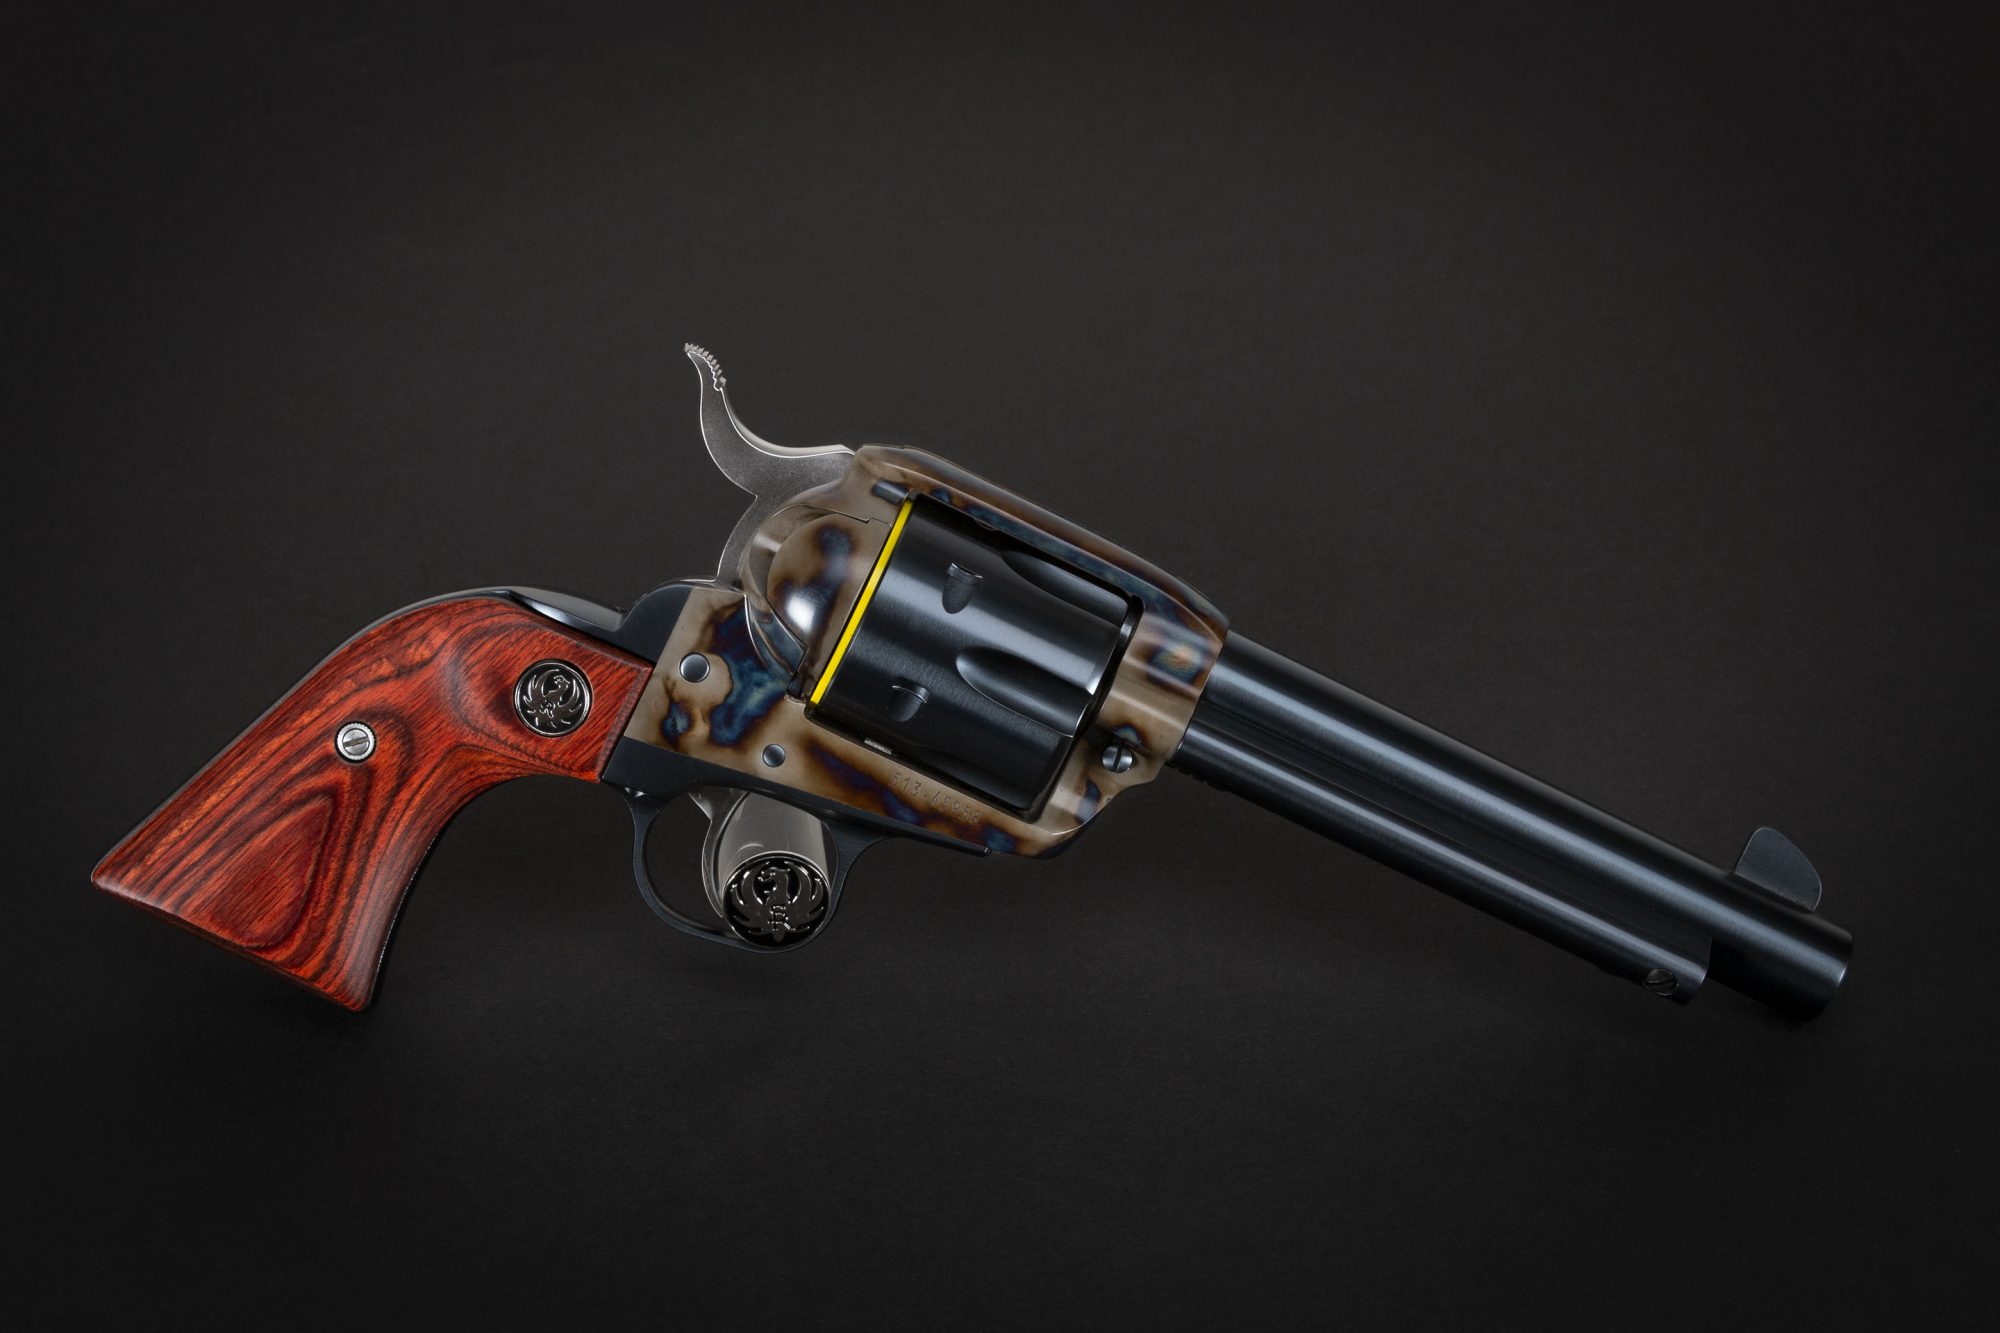 Photo of a Ruger New Vaquero single action revolver, featuring restoration-grade metal finishes by Turnbull Restoration of Bloomfield, NY